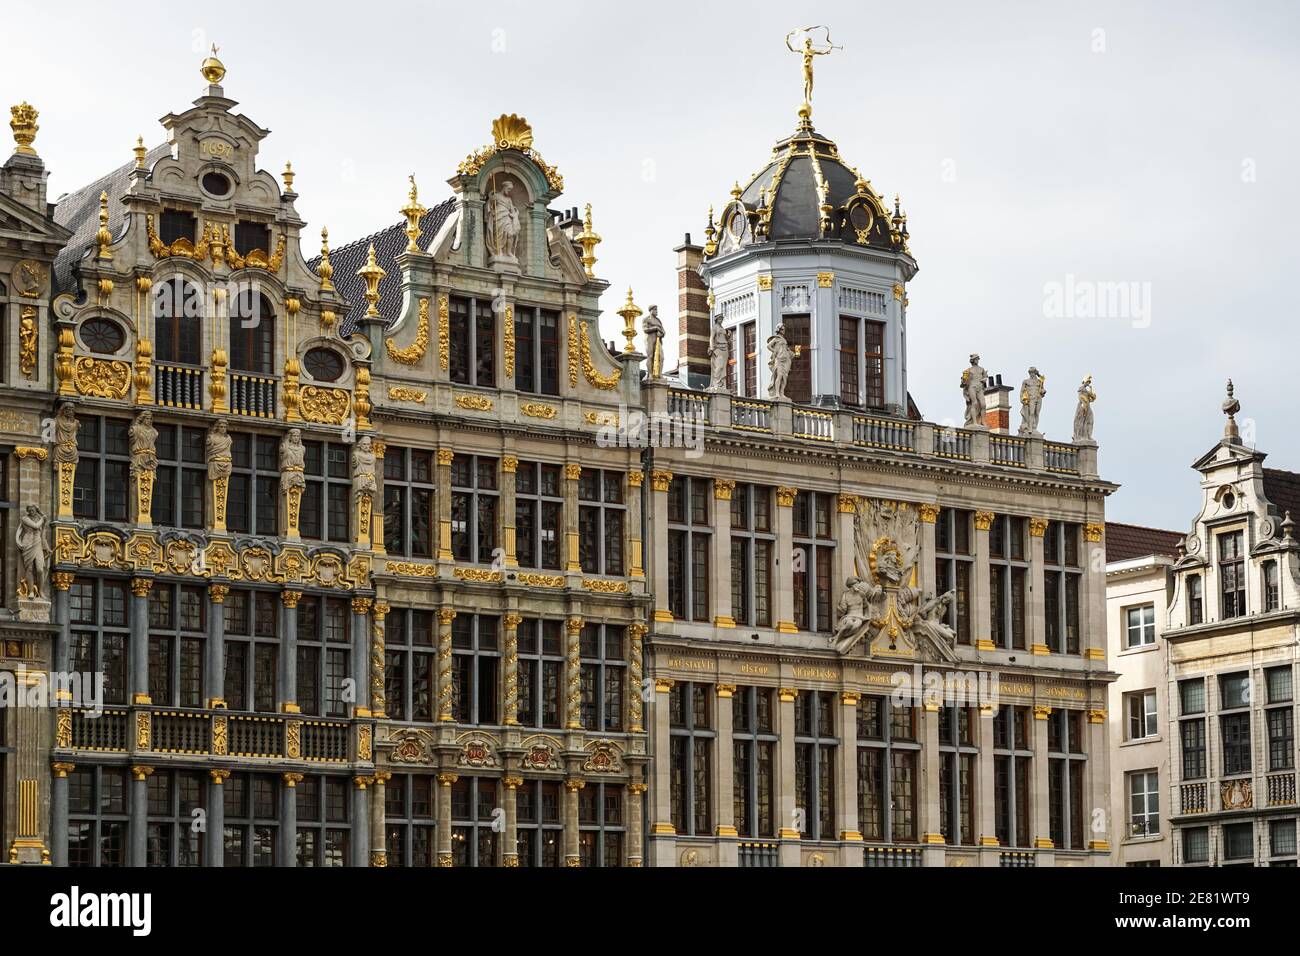 Facades of guild houses on the Grand Place, Grote Markt square in Brussels, Belgium Stock Photo